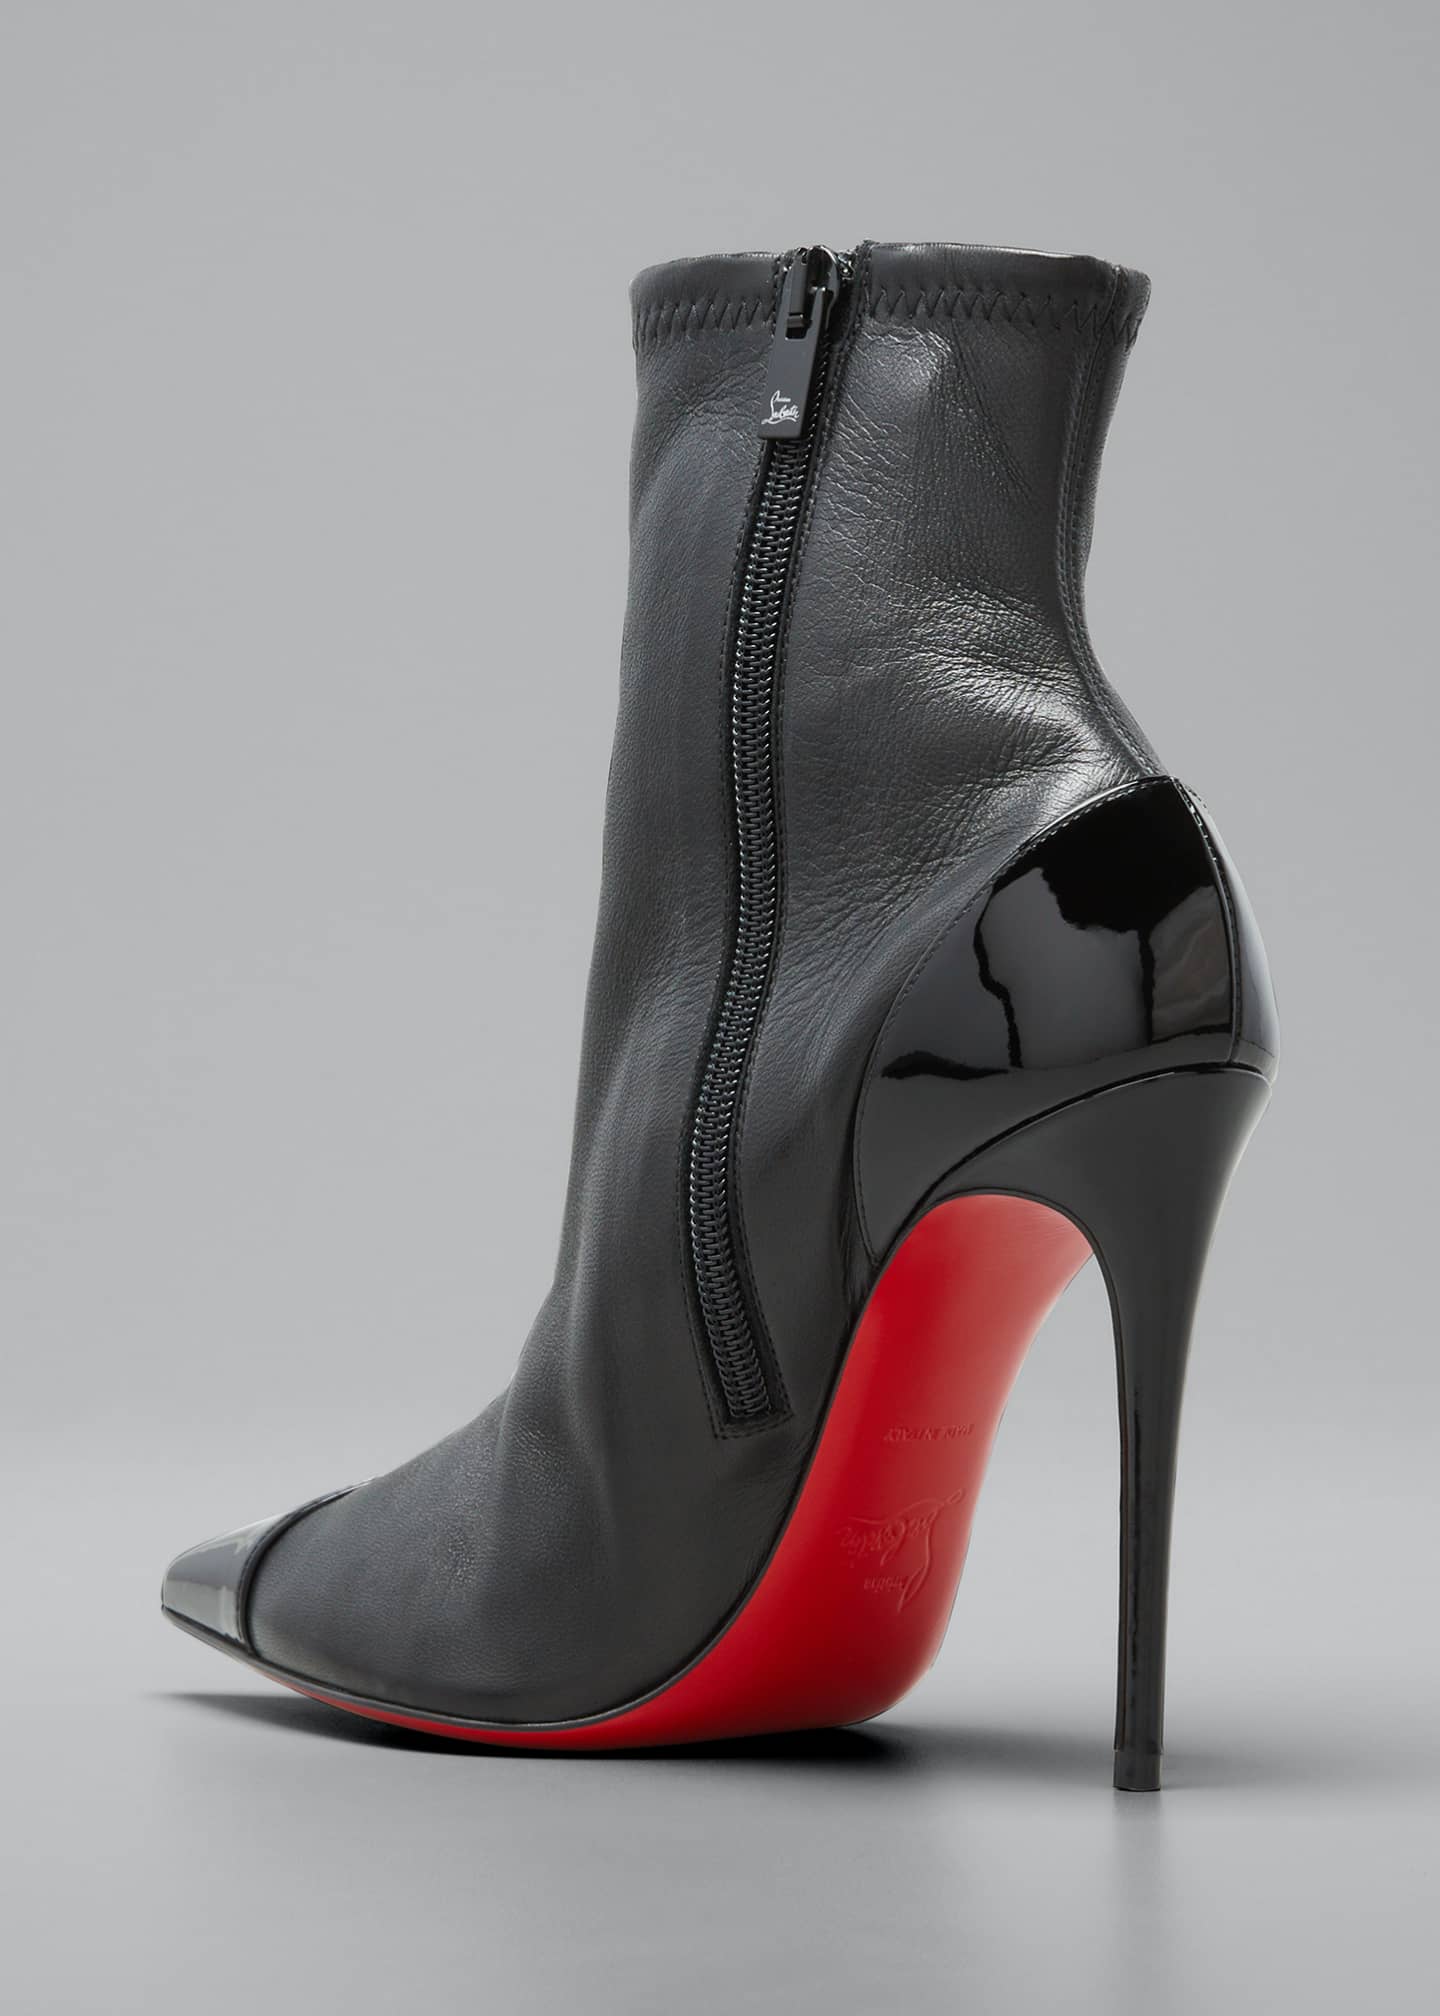 Christian Louboutin Bibooty 100mm Mixed Leather Red Sole Booties ...